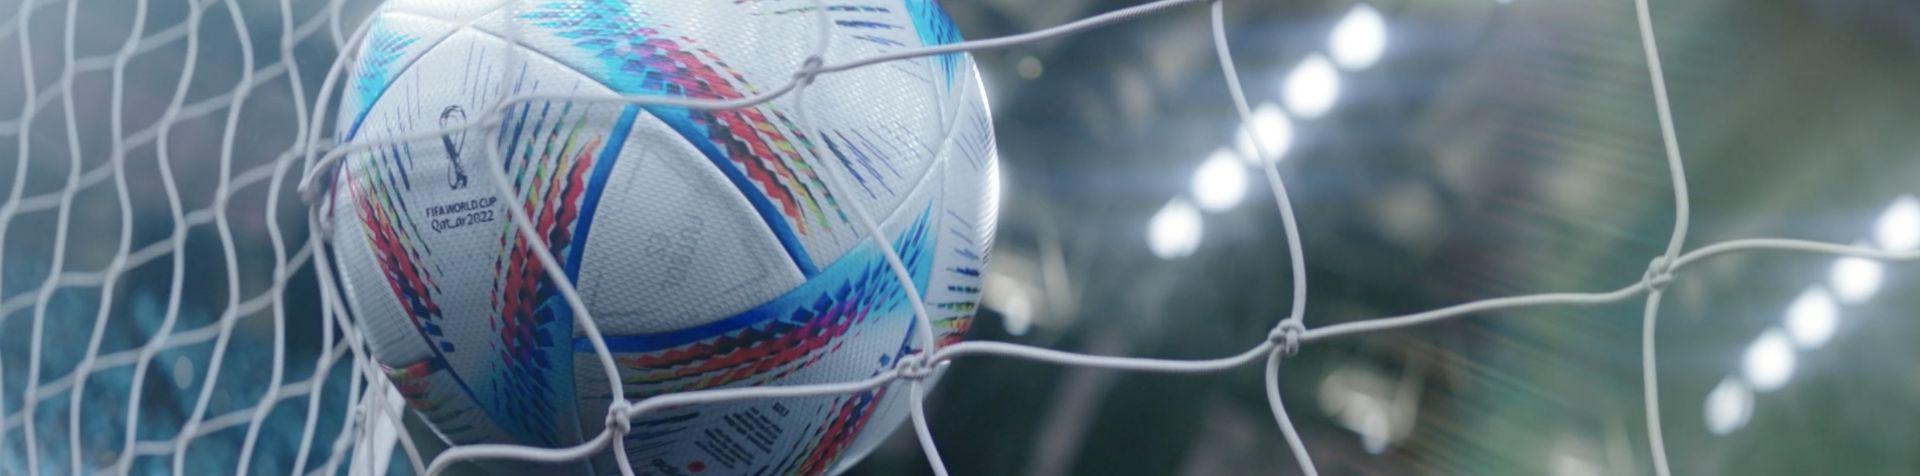 A white football with blue and red stripes hitting the back of a goal.